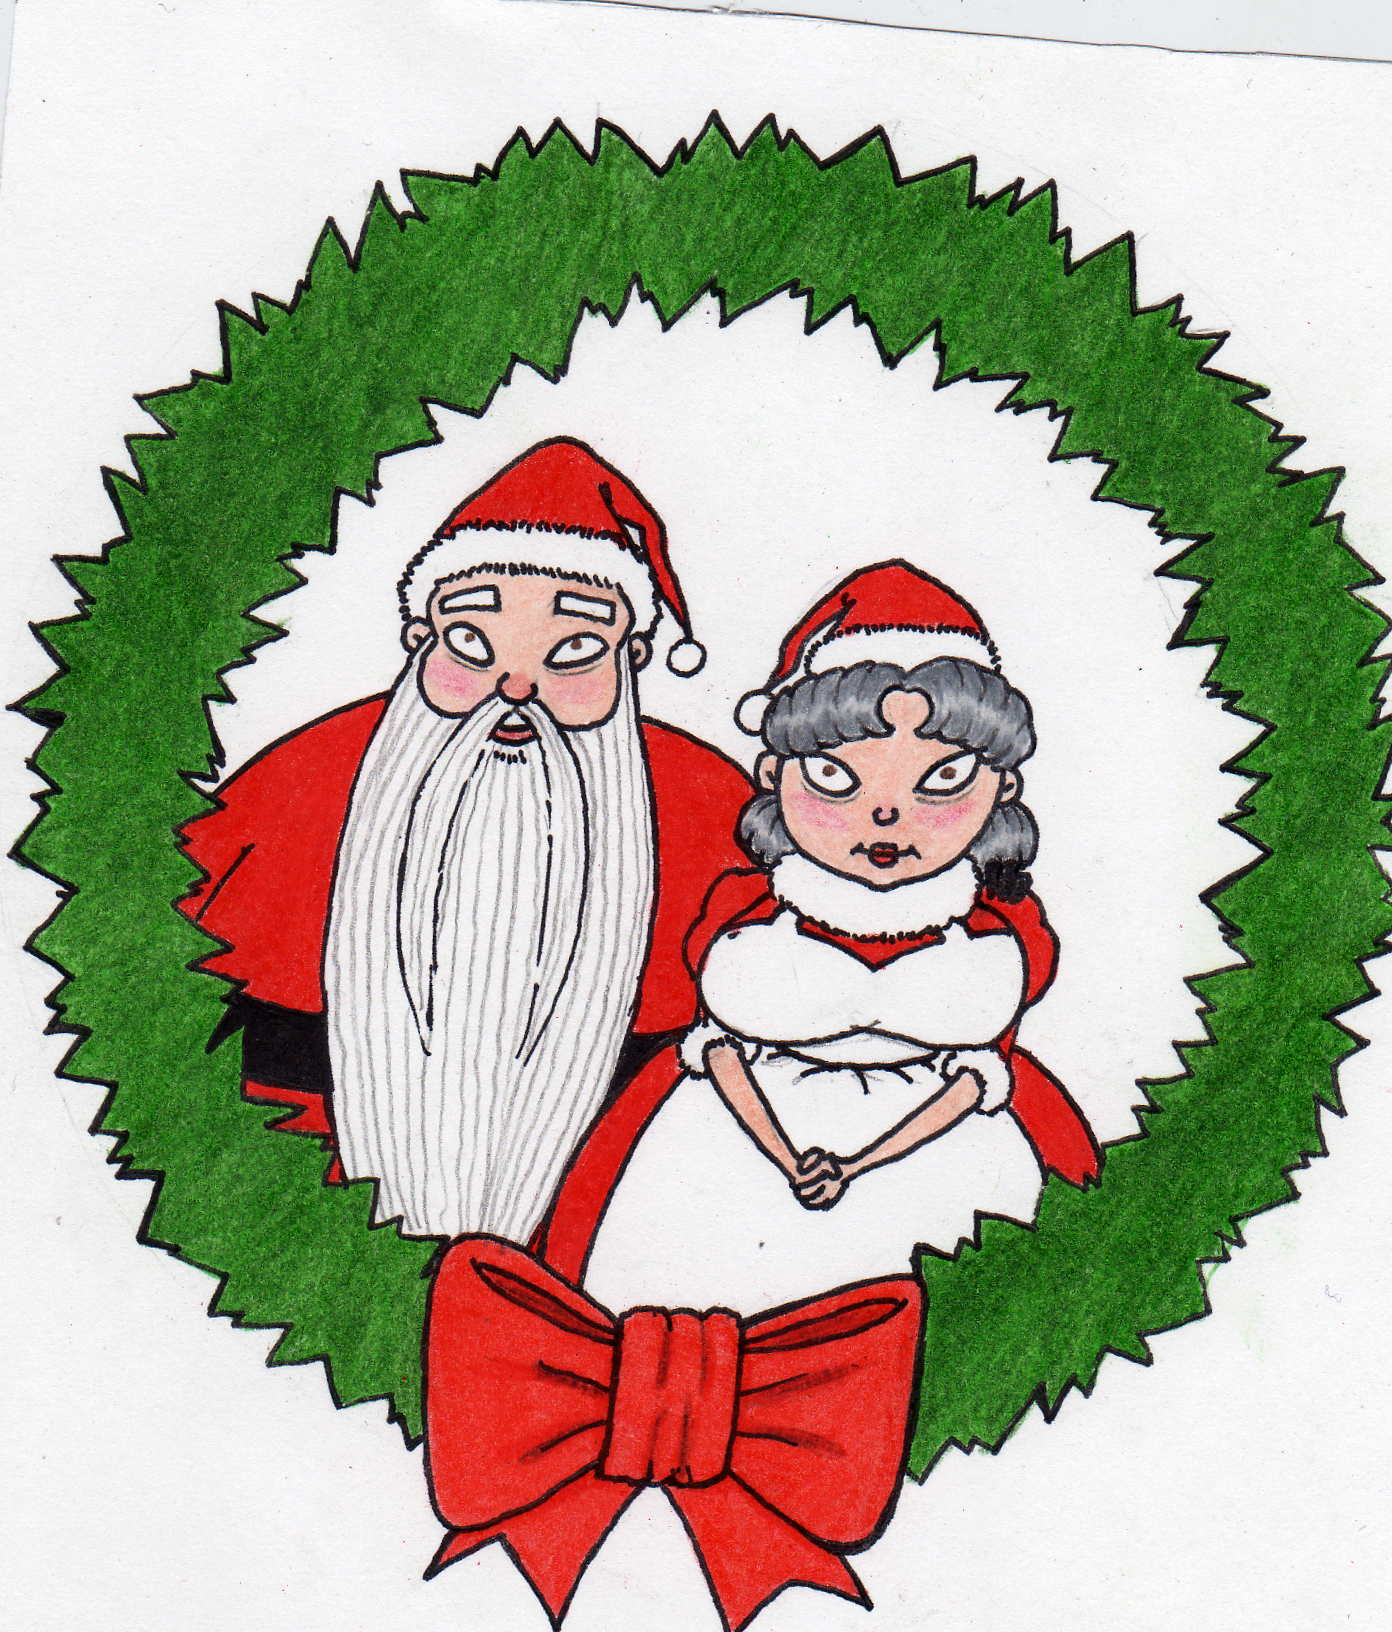 Mr. and Mrs. Claus by pooterda